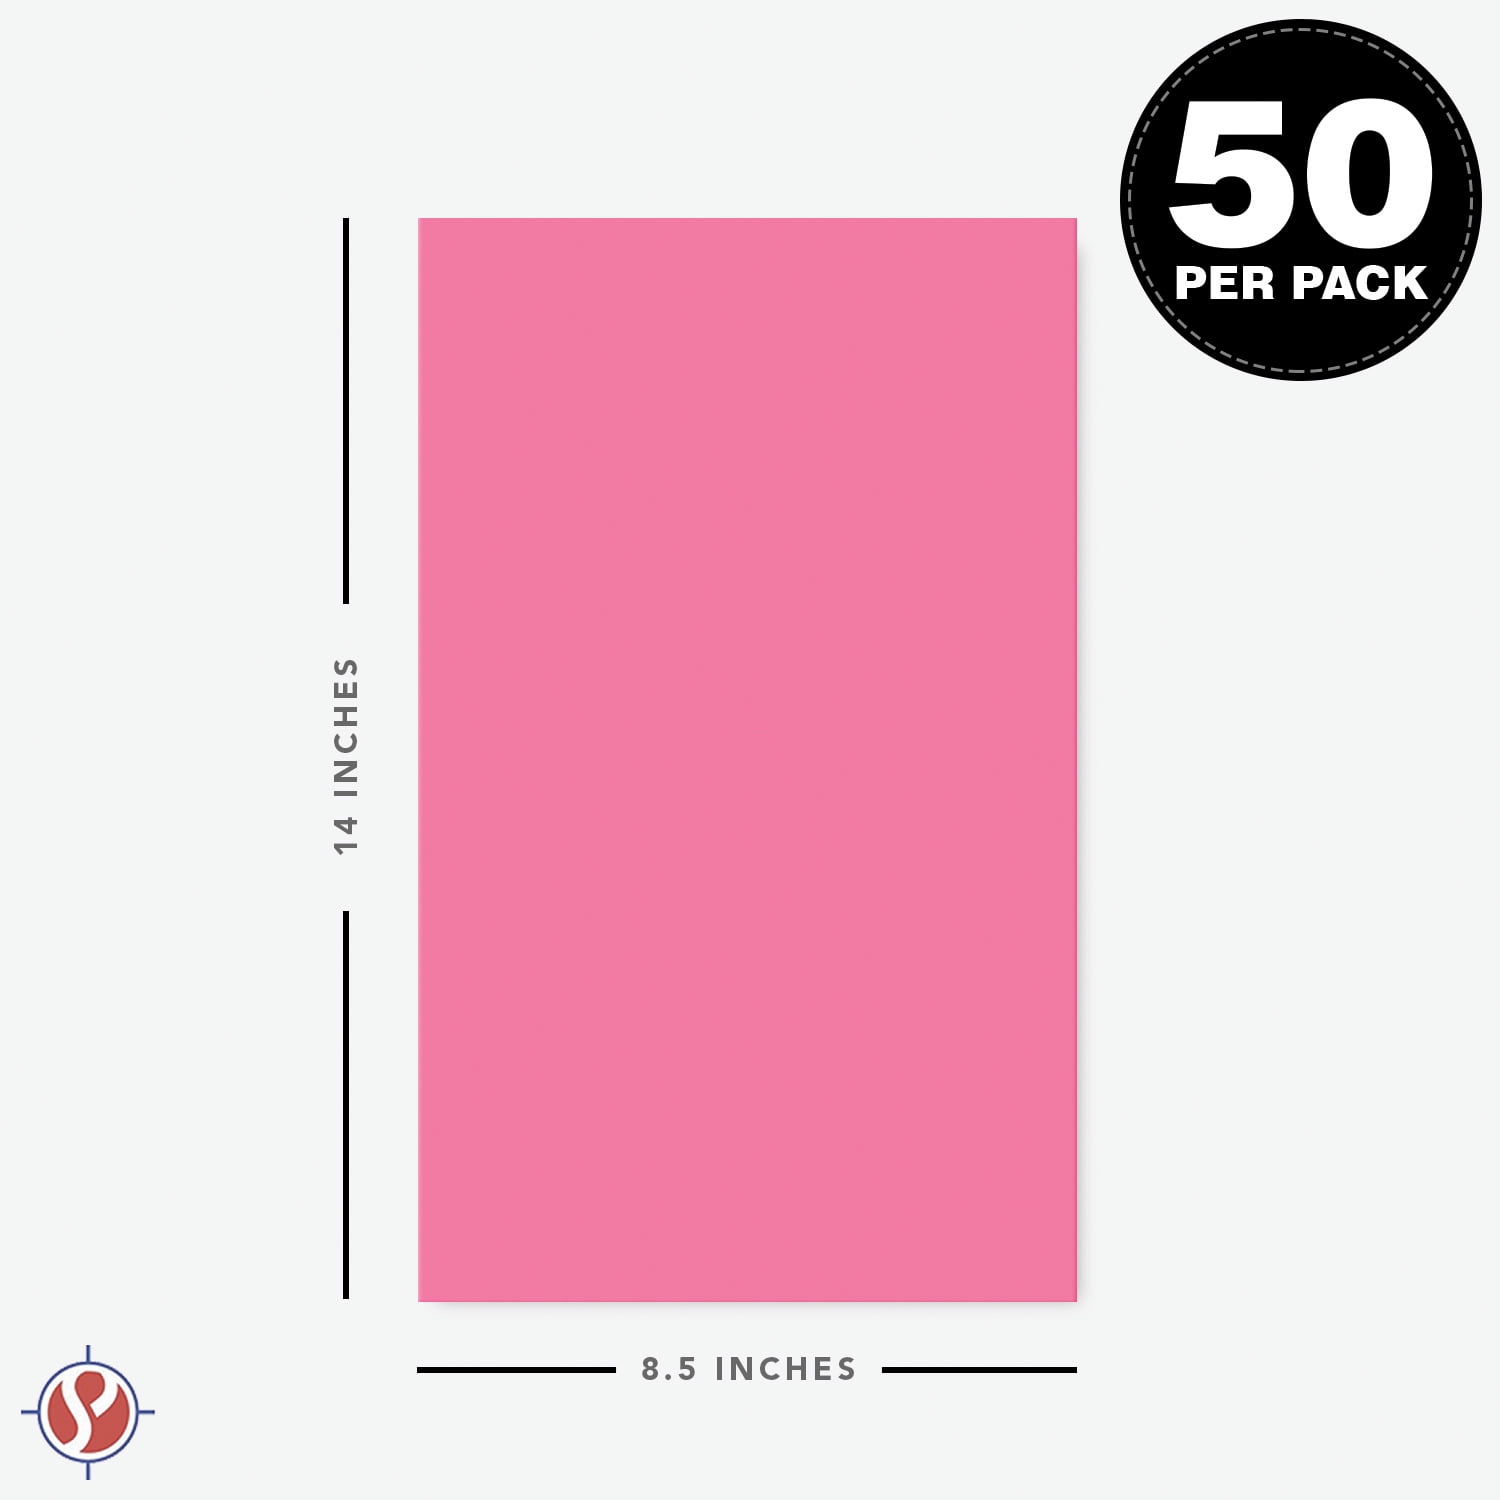 Hot Pink Paper Stock Photo by ©StayceeO 11379432